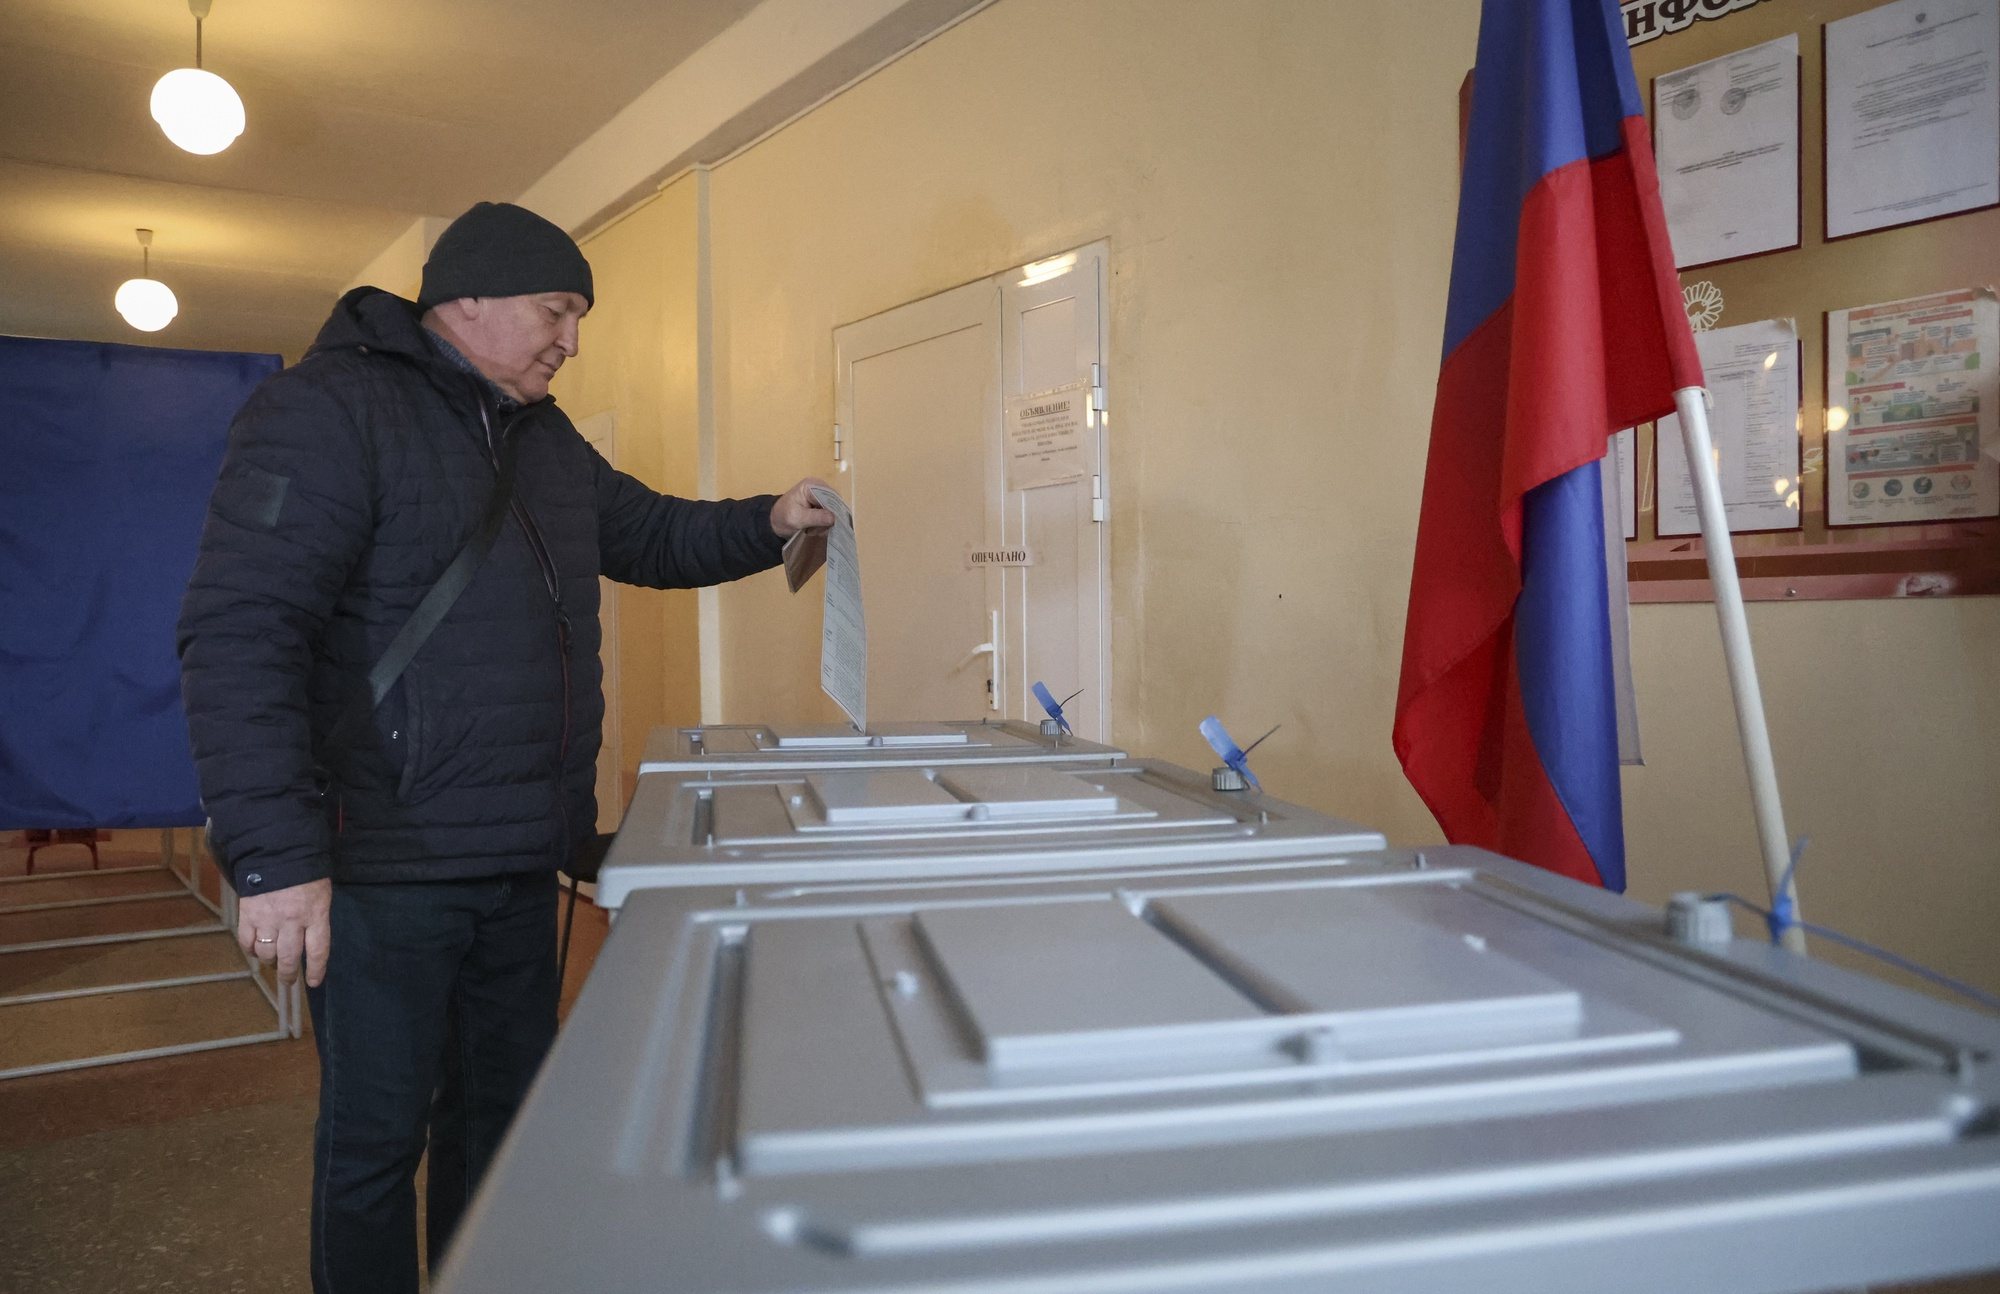 epa11225531 A man casts his ballot during the Russian presidential elections in Makeevka, Donetsk region, Russian controlled part of Ukraine, 17 March 2024. The Federation Council has scheduled presidential elections for March 17, 2024. Voting will last three days on 15-17 March. Four candidates registered by the Central Election Commission of the Russian Federation are vying for the post of head of state: Leonid Slutsky, Nikolai Kharitonov, Vladislav Davankov and Vladimir Putin. Residents of Russian-controlled territories of Ukraine are electing the President of Russia for the first time.  EPA/ALESSANDRO GUERRA